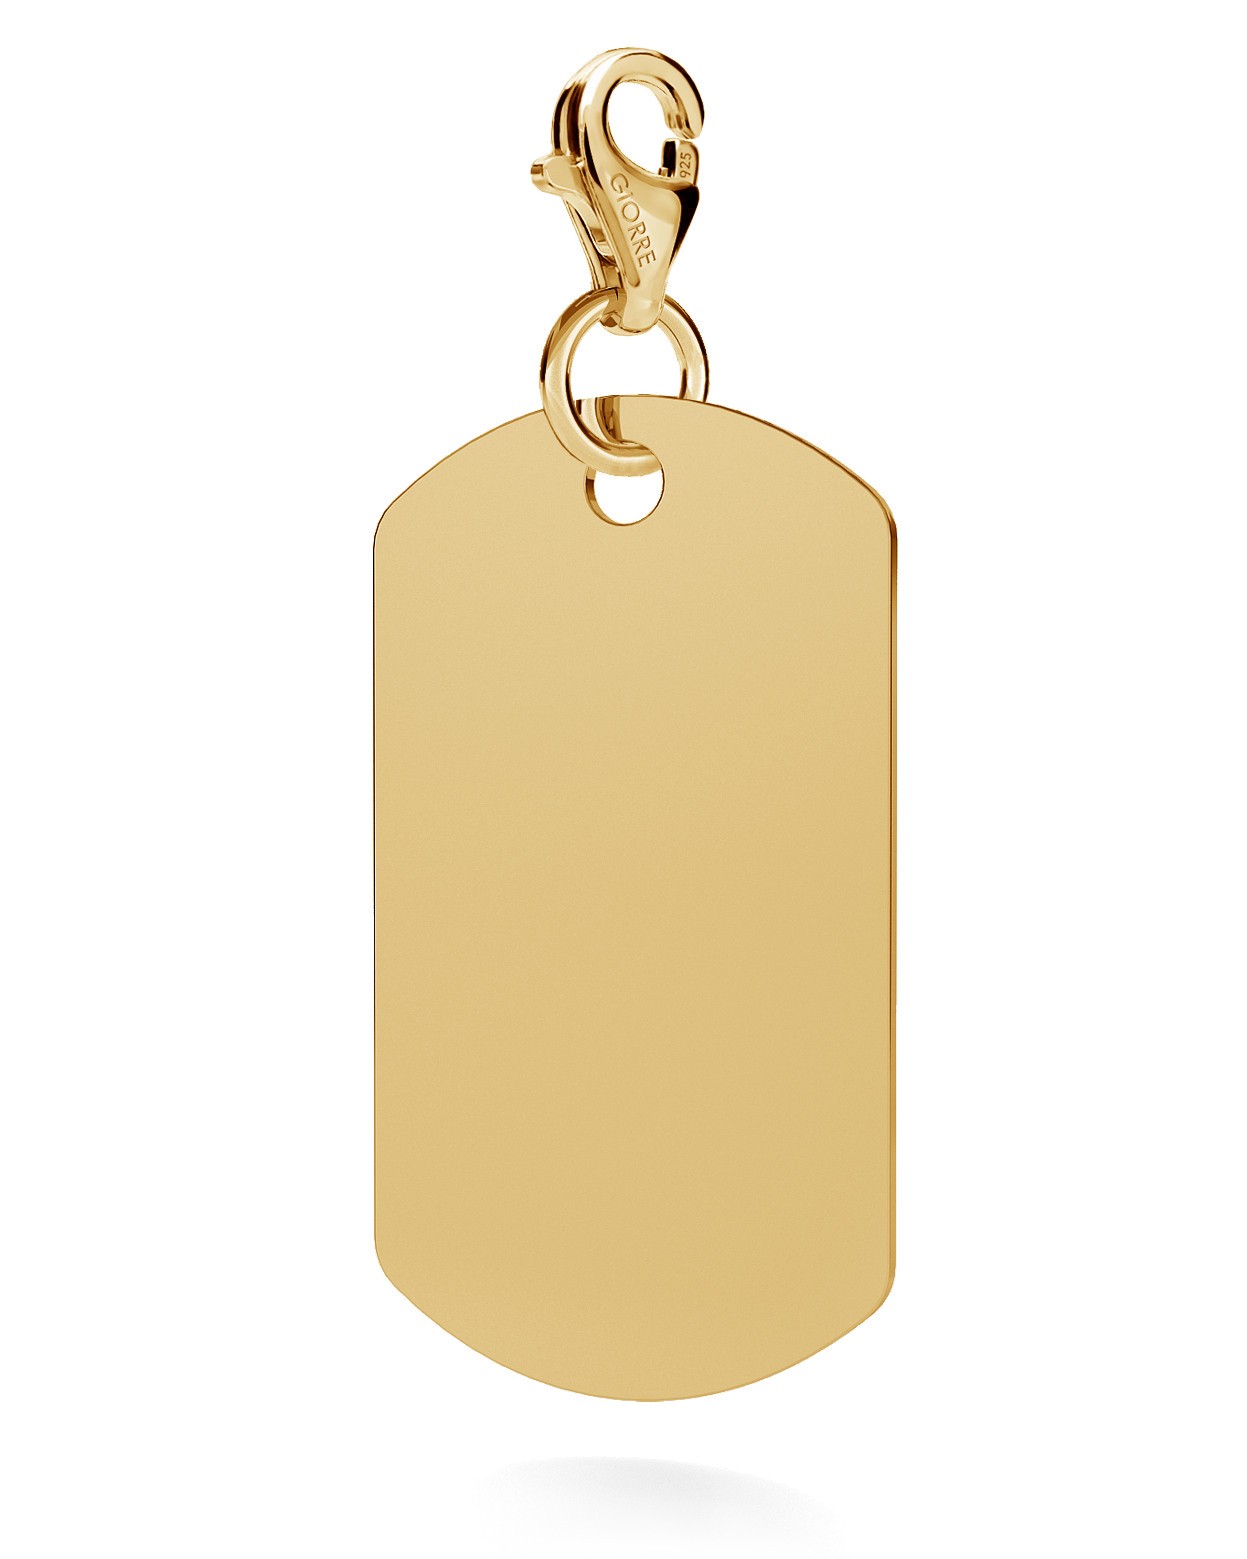 CHARM 67, DOG TAG WITH ENGRAVE SILVER 925,  RHODIUM OR GOLD PLATED